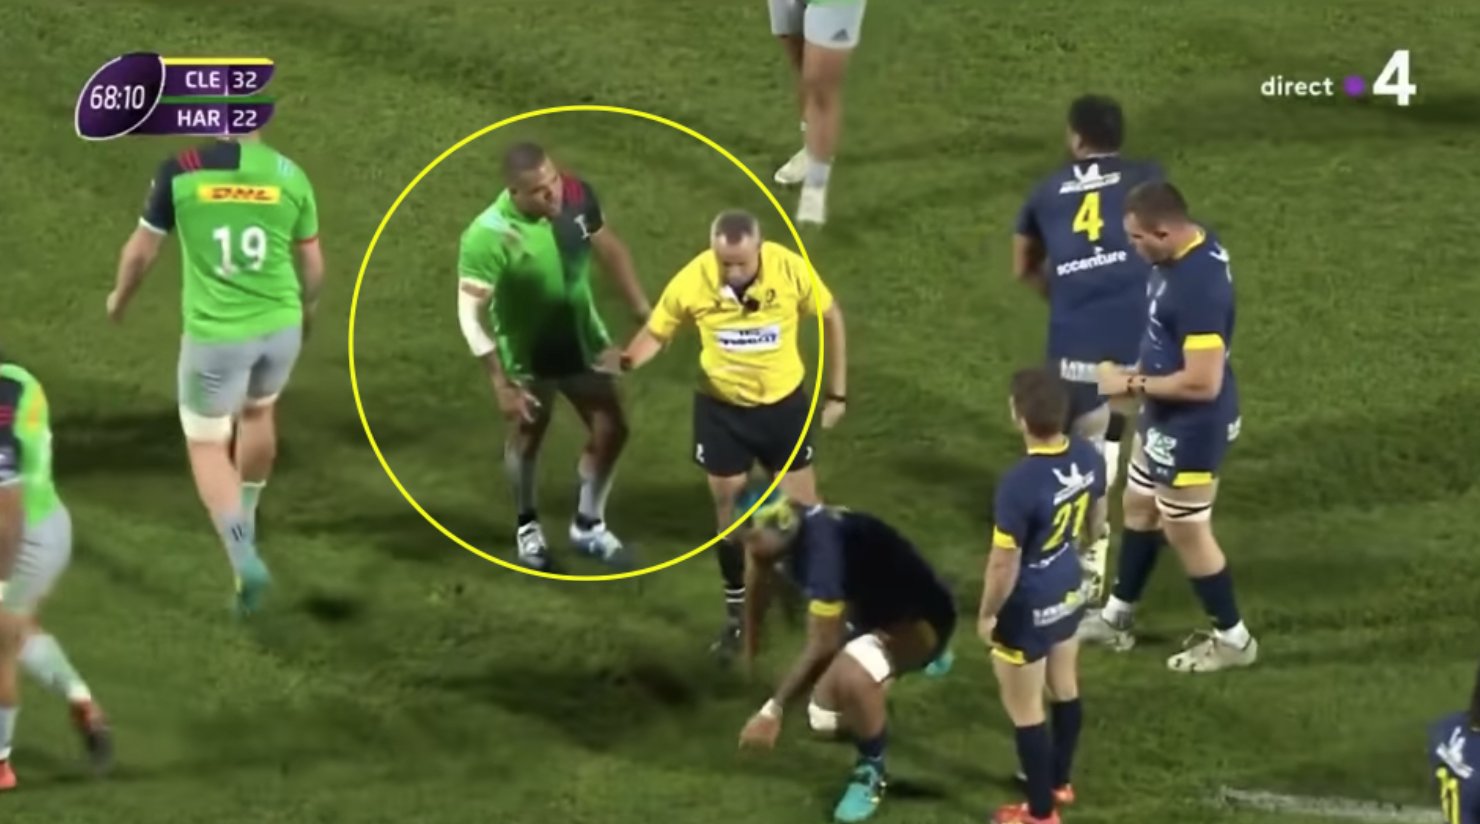 WATCH: Sinckler celebrates tackle with animalistic scream that's so bad the ref had to tell him off